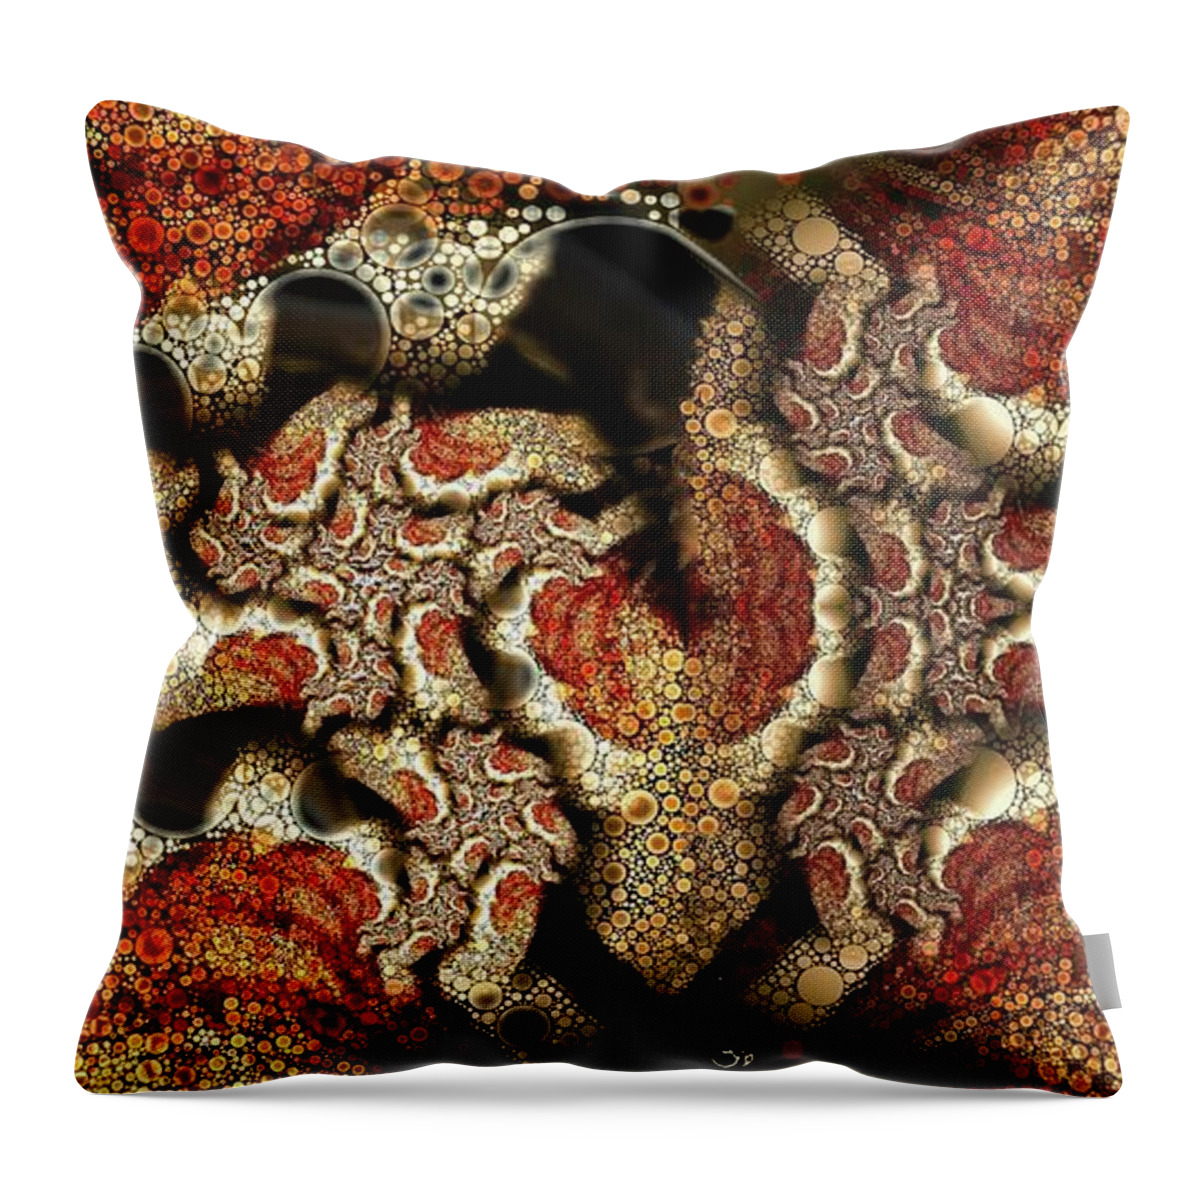 Abstract Throw Pillow featuring the digital art Embedded by Ron Bissett